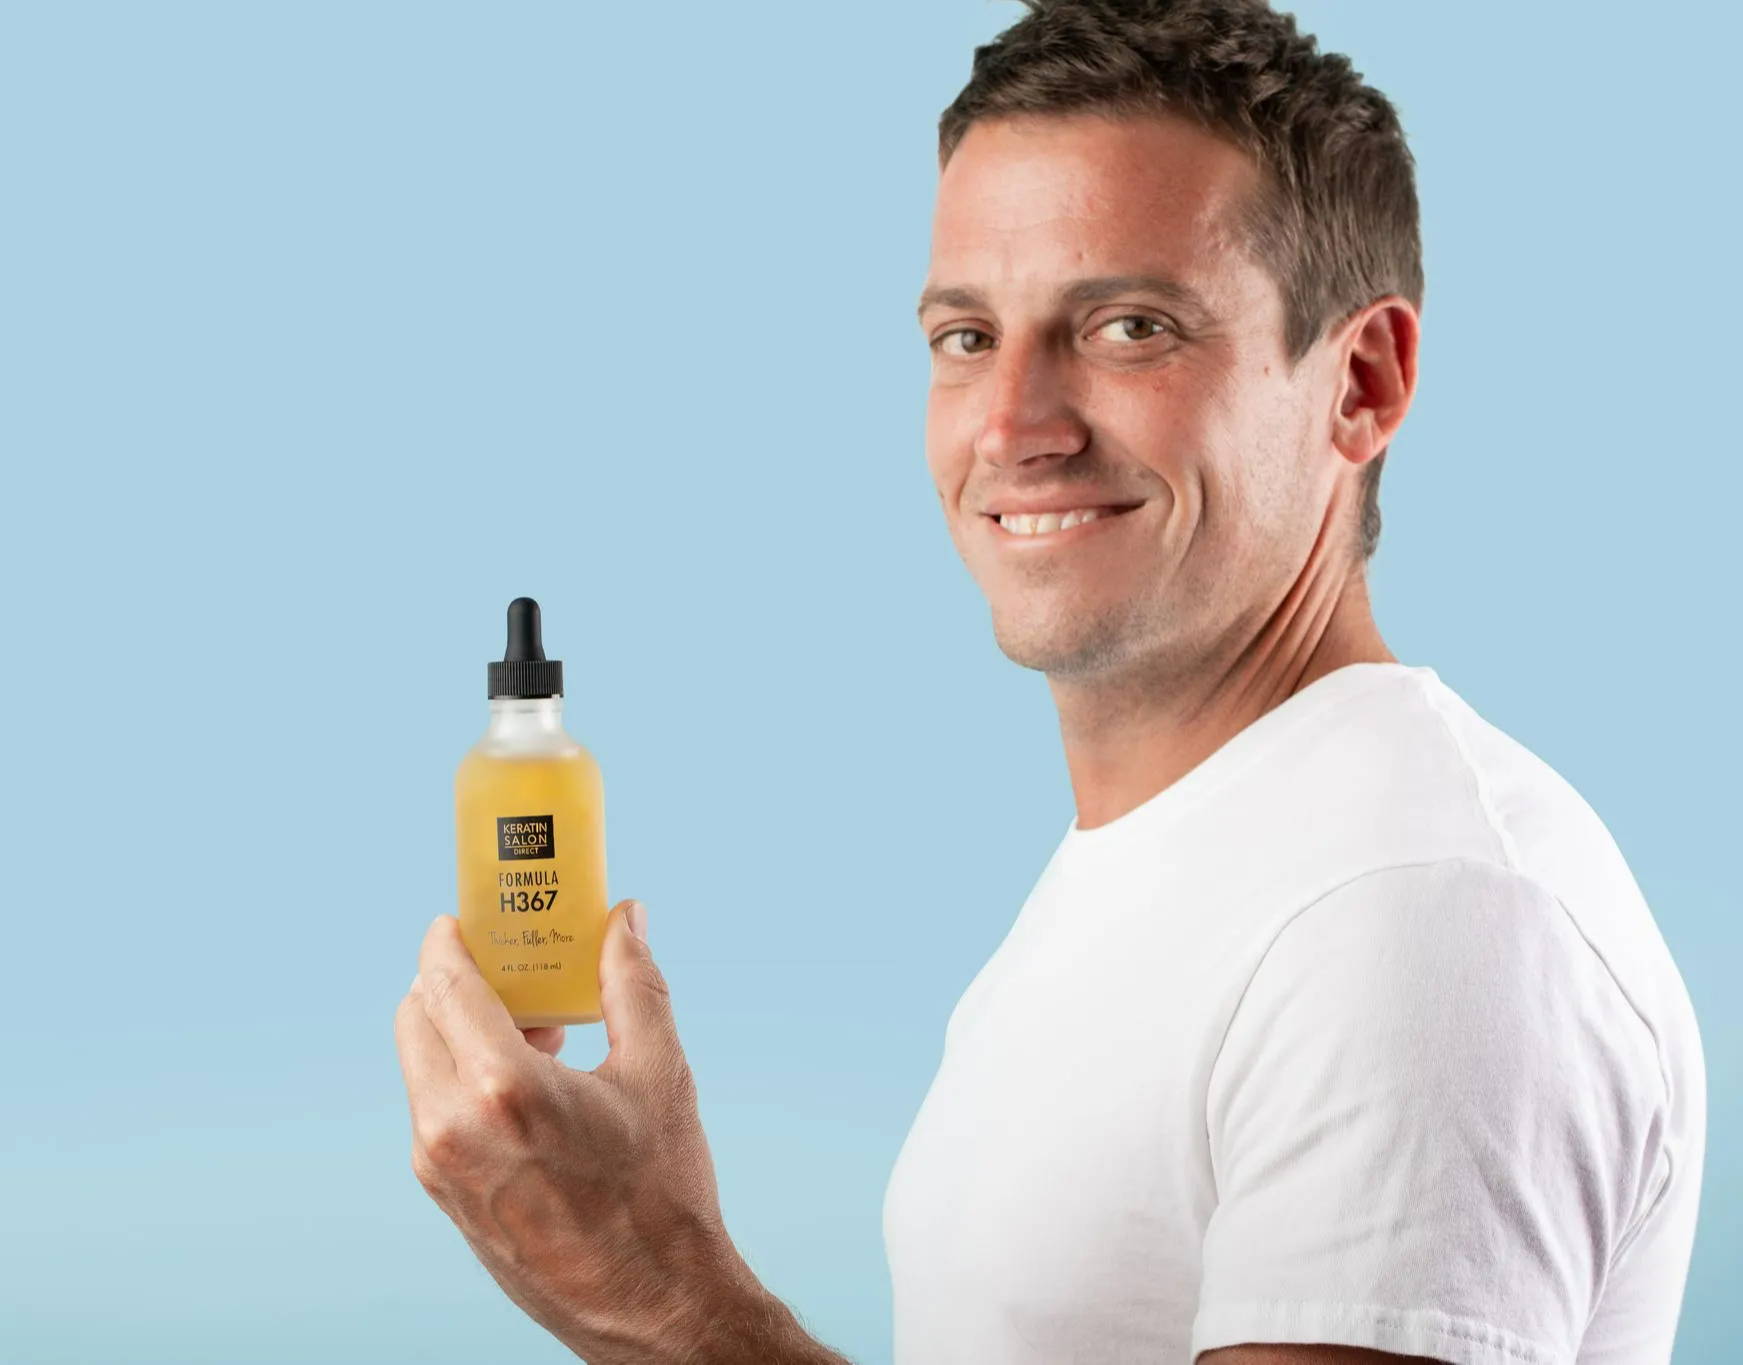 Man with hair growth product